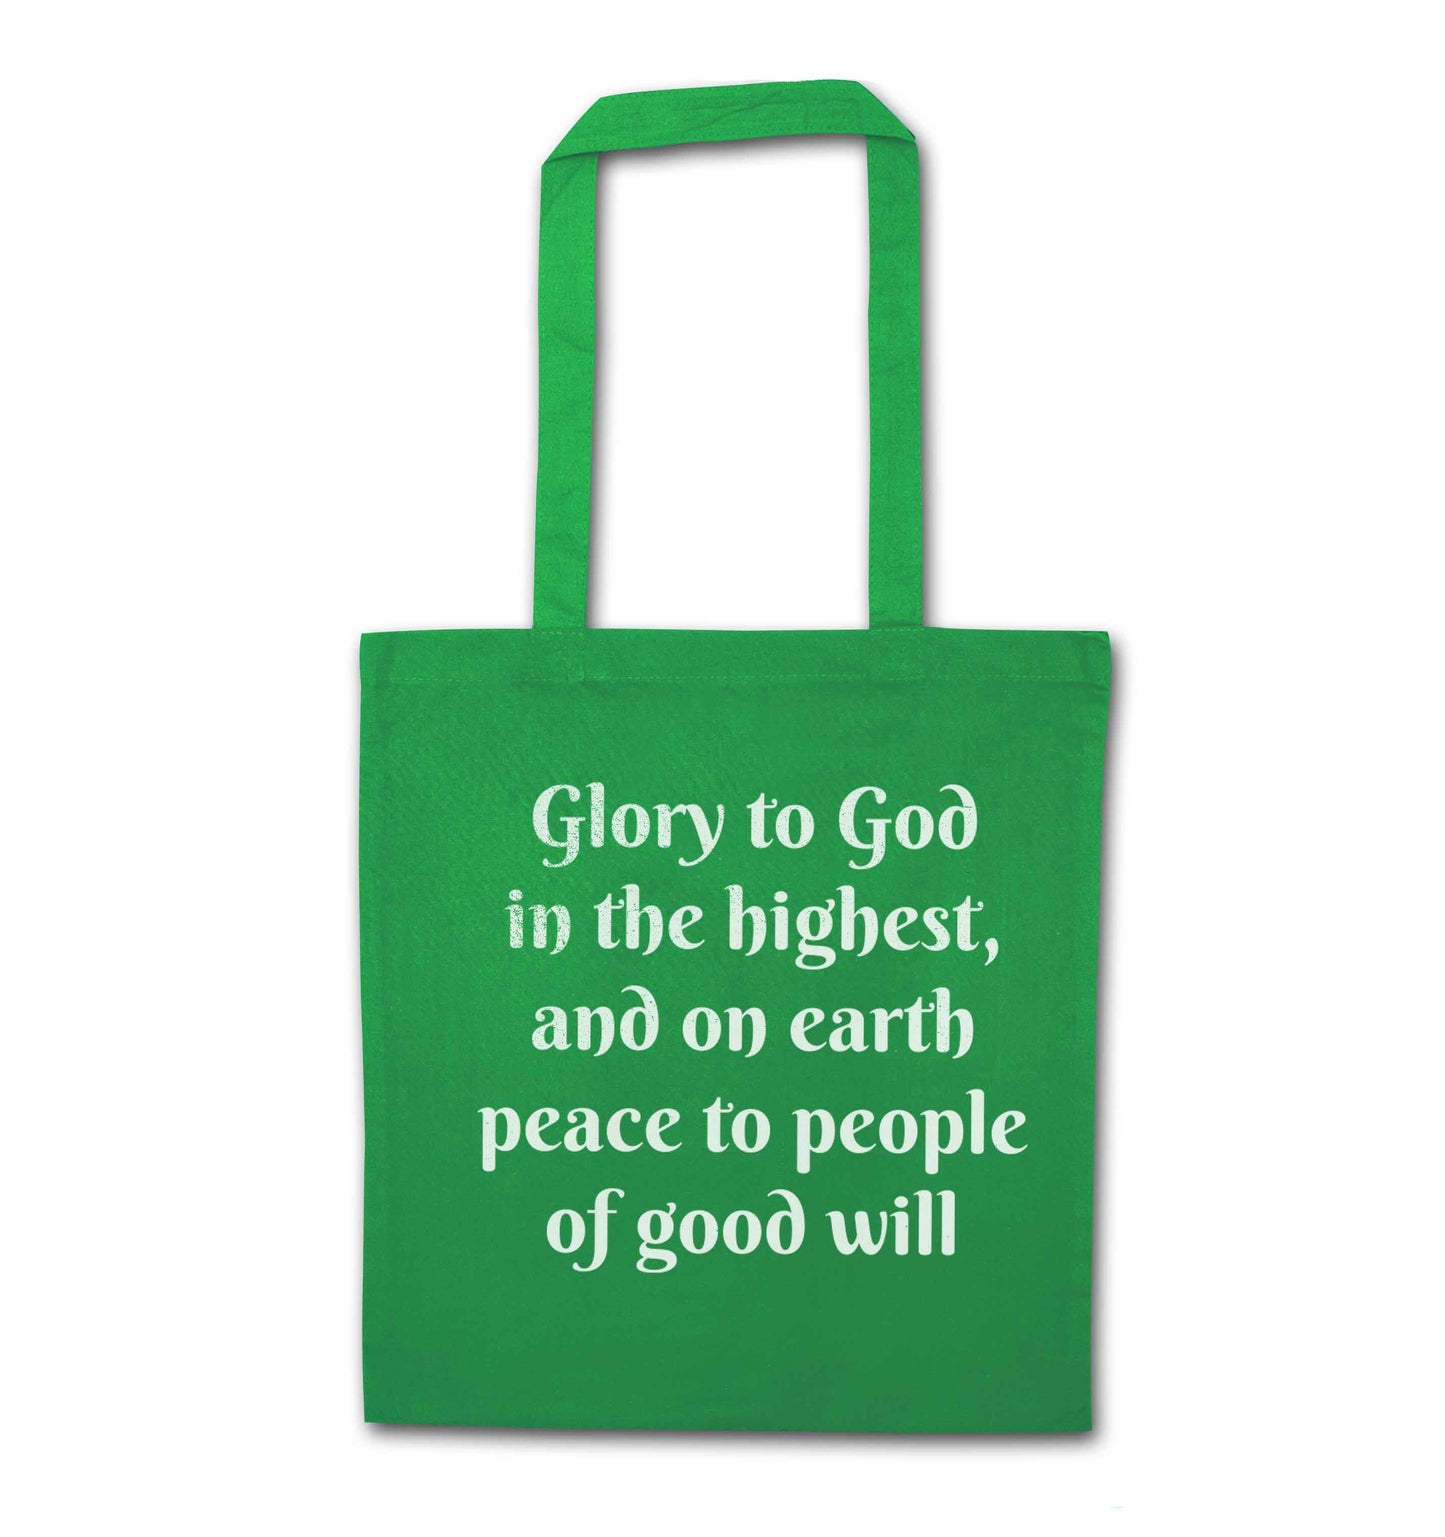 Glory to God in the highest, and on earth peace to people of good will green tote bag